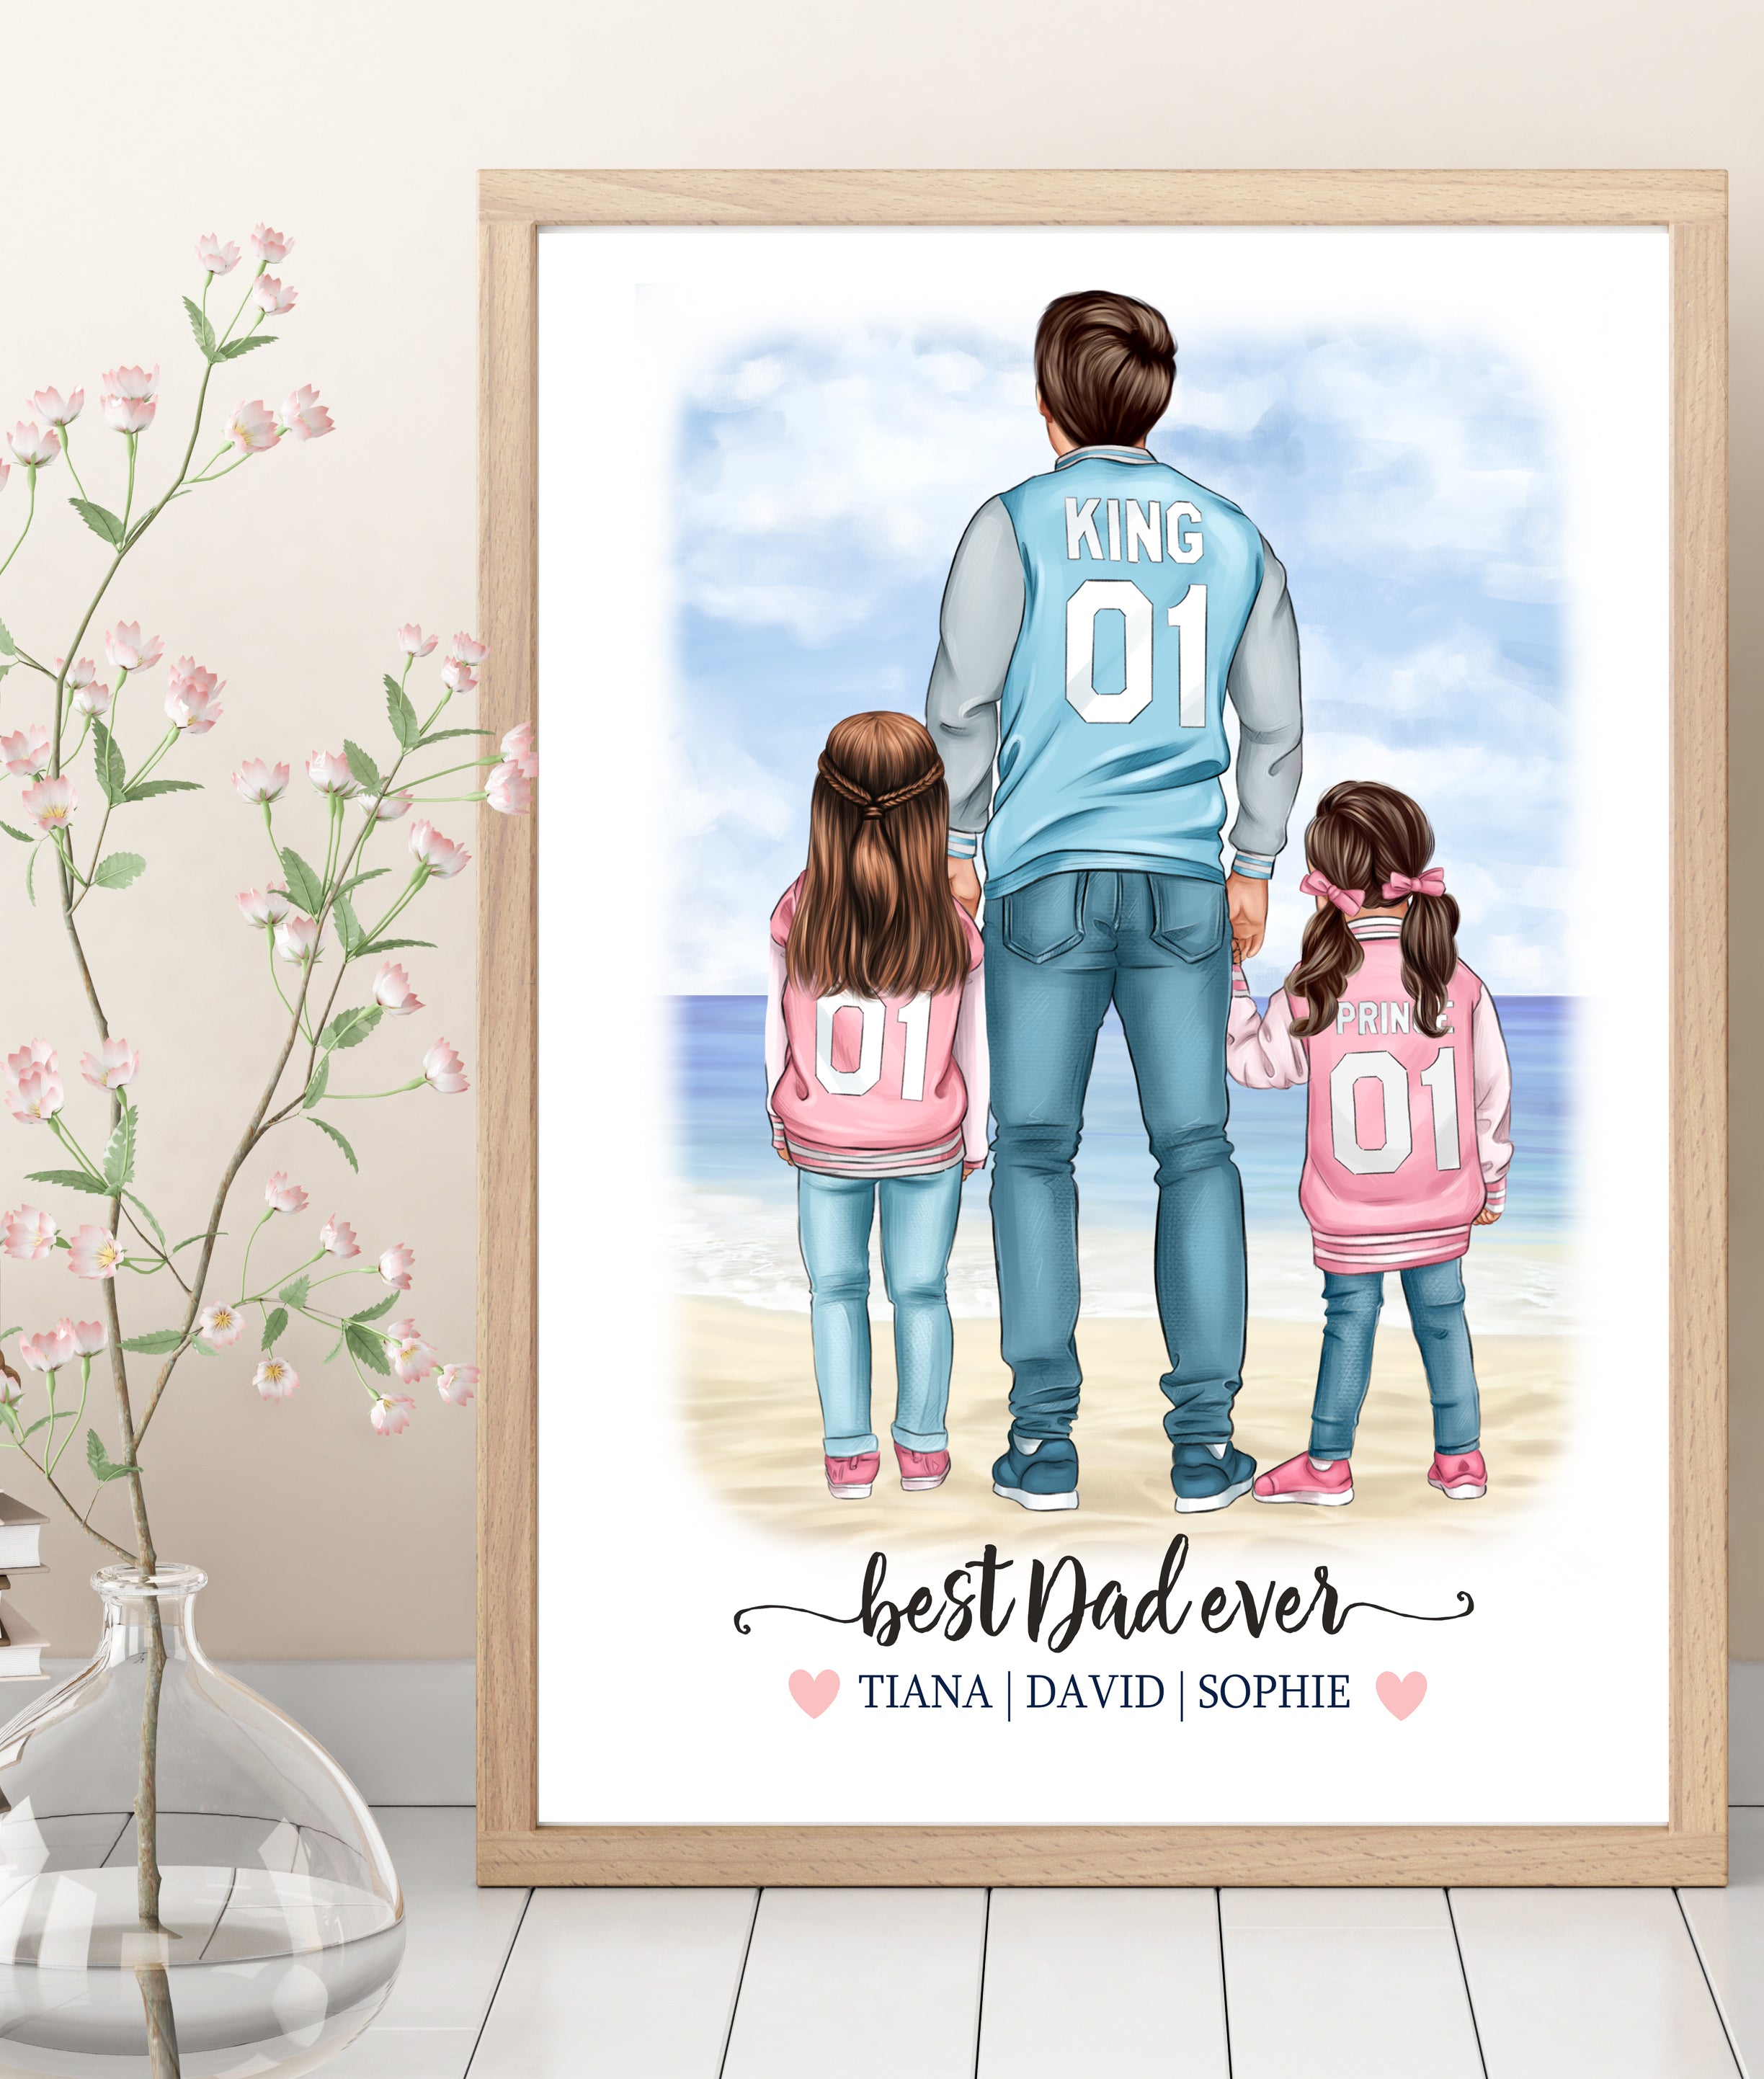 Personalised FATHER'S DAY Prints